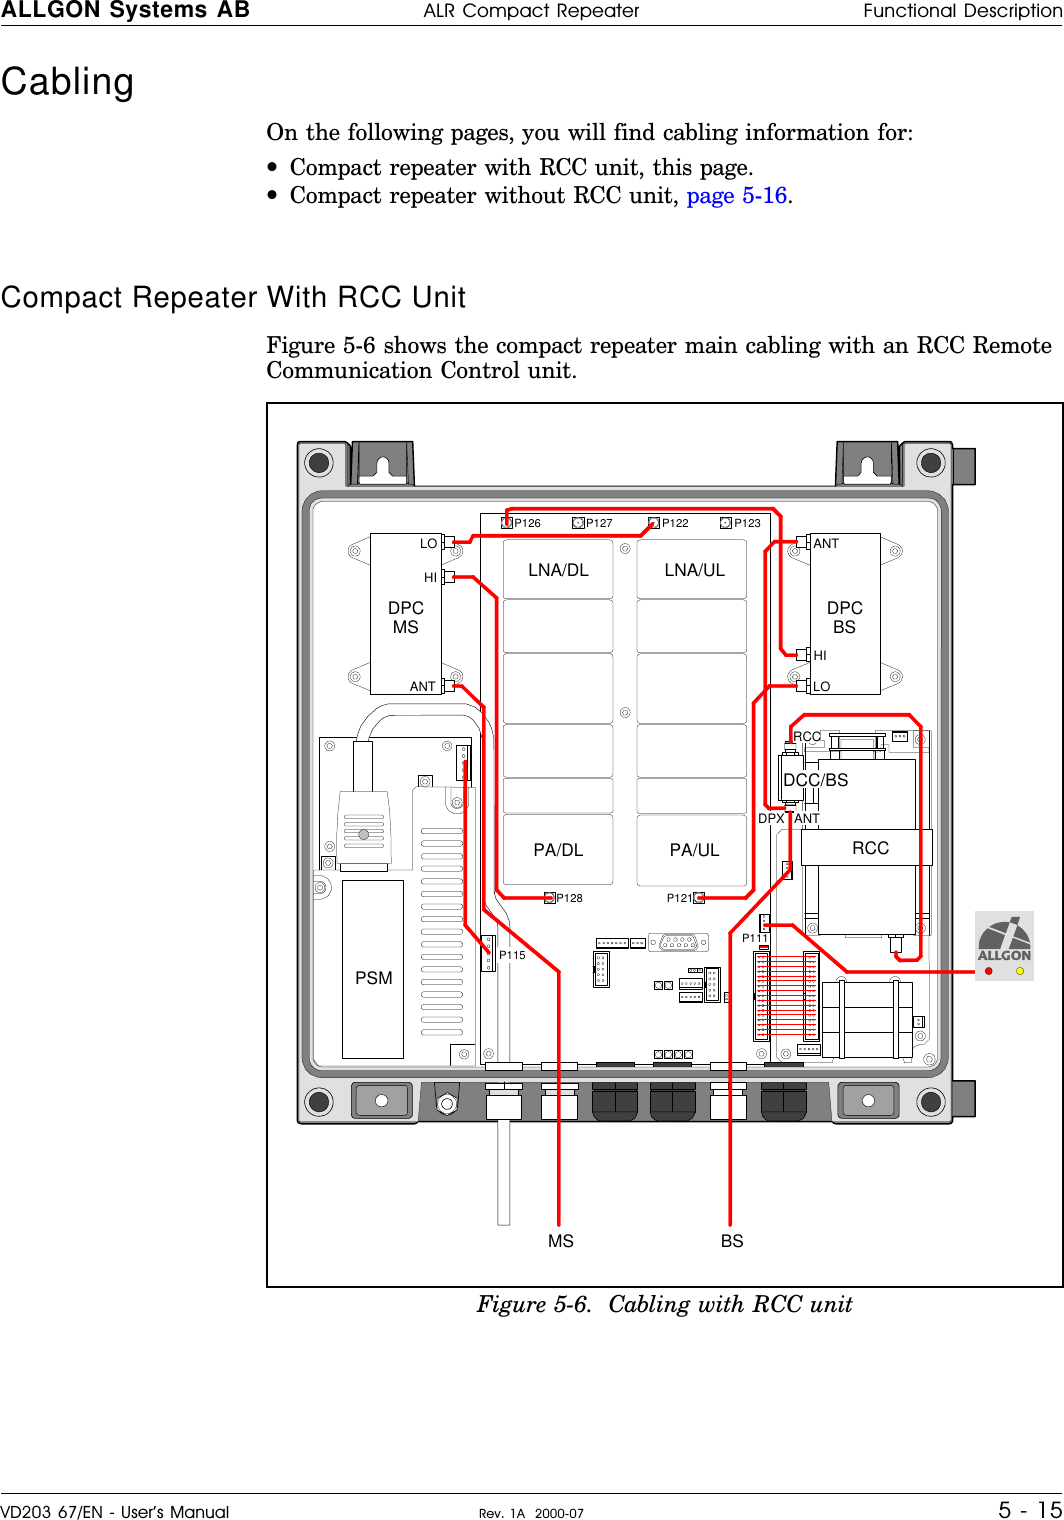 Cabling On the following pages, you will find cabling information for:•Compact repeater with RCC unit, this page.•Compact repeater without RCC unit, page 5-16.Compact Repeater With RCC Unit   Figure 5-6 shows the compact repeater main cabling with an RCC RemoteCommunication Control unit.ANTLOHIANTLOHIP126 P127 P122 P123P121P128P111DPCMSLNA/ULLNA/DLPA/ULPA/DLPSMDCC/BSRCCDPCBSRCCANTDPXP115MS BSFigure 5-6.  Cabling with RCC unitALLGON Systems AB ALR Compact Repeater Functional DescriptionVD203 67/EN - User’s Manual Rev. 1A  2000-07 5 - 15